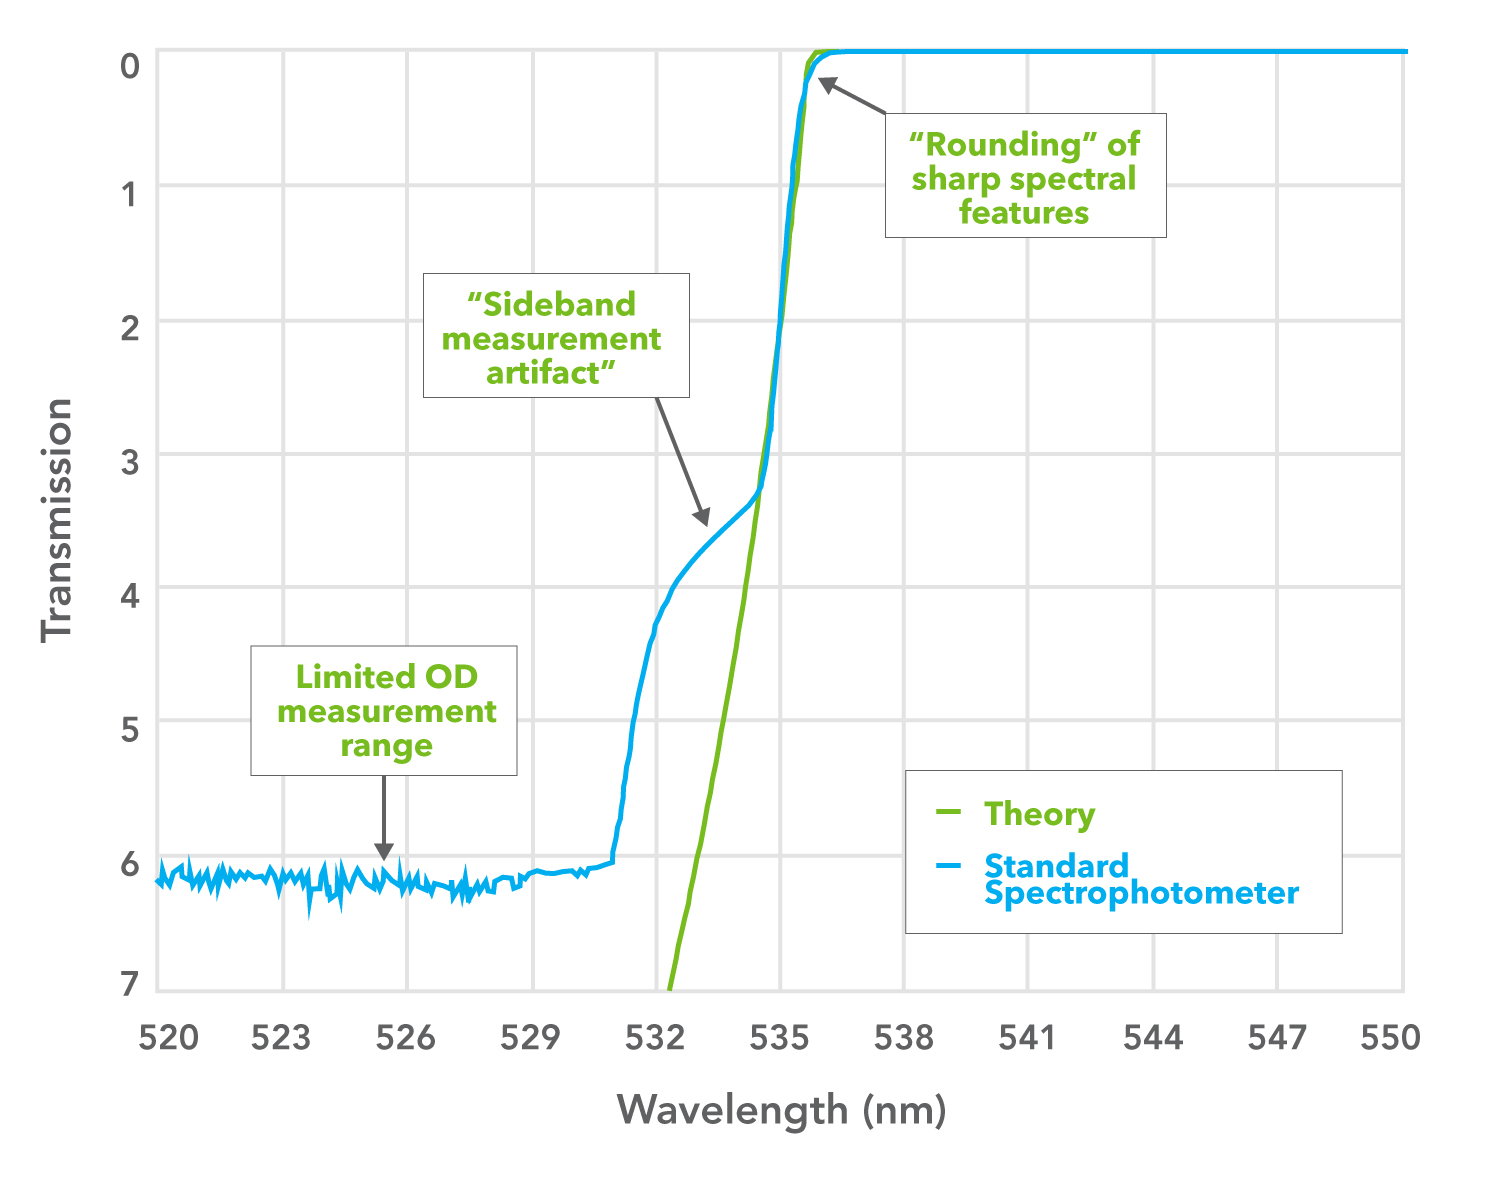 Measurement artifacts observed using a commercial spectrophotometer.